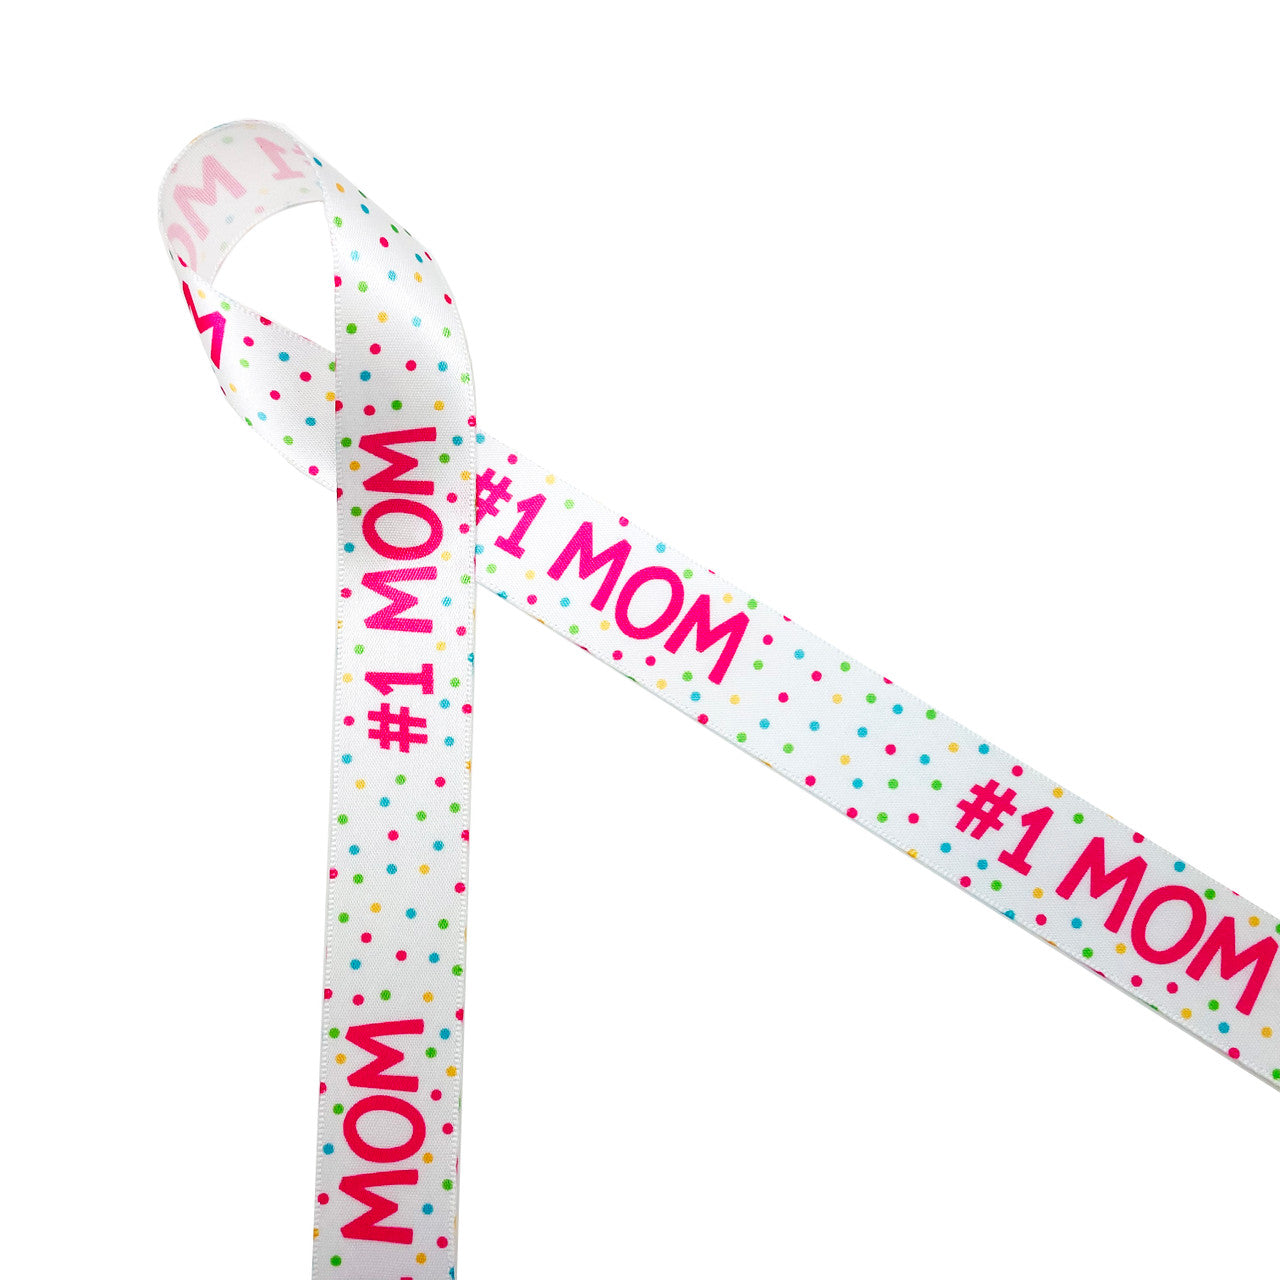 Mother's Day #1 Mom ribbon in pink with polka dots of pink, yellow, blue and green printed on 7/8" white single face satin ribbon is the perfect ribbon for Mother's Day gifts, floral design, party favors and party decor. Be sure to have this ribbon on hand for your #1 Mom. All our ribbon is designed and printed in the USA